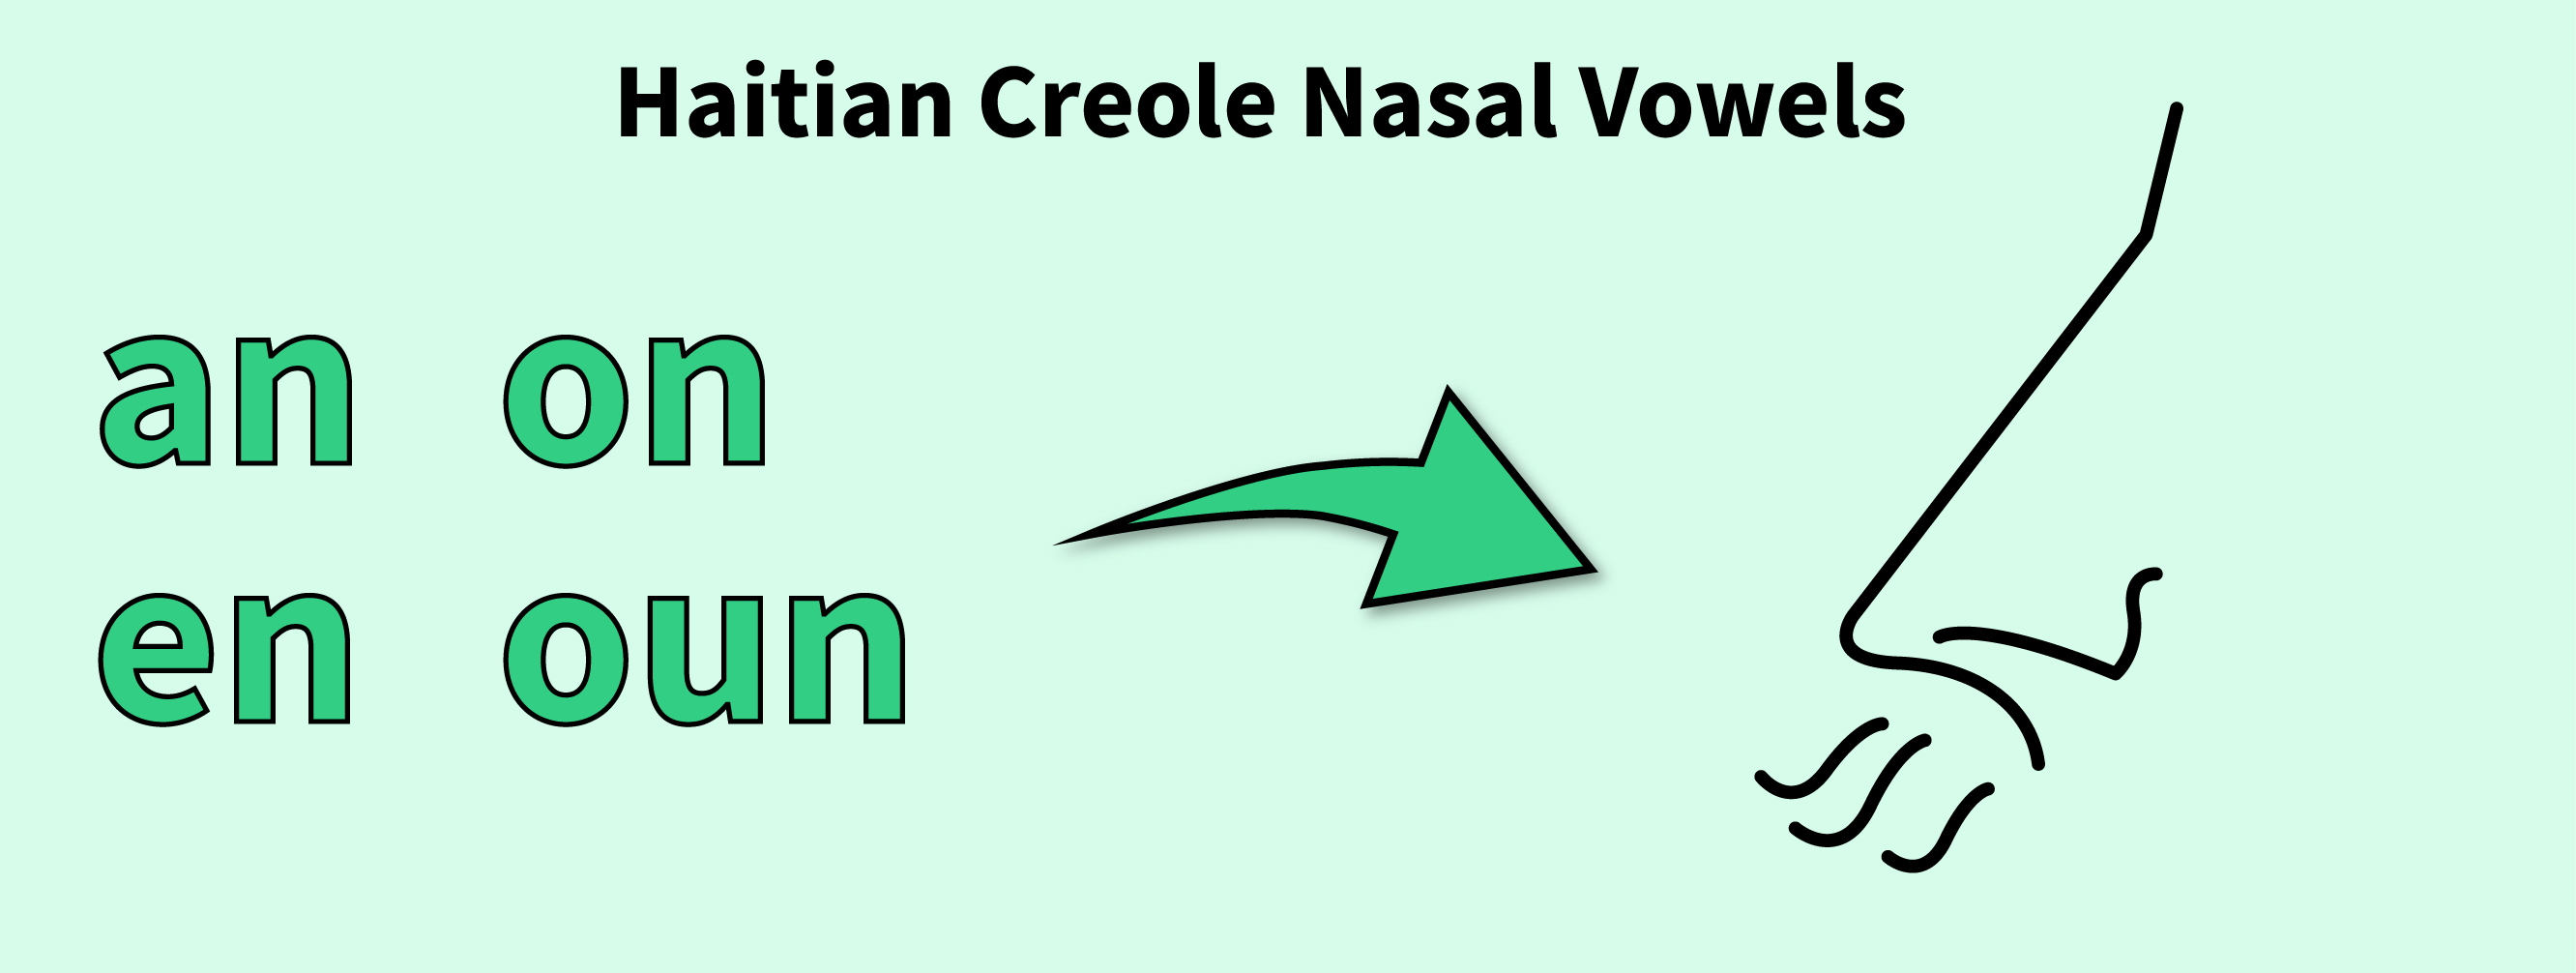 Nasal vowels in Haitian Creole are an, en, on and oun